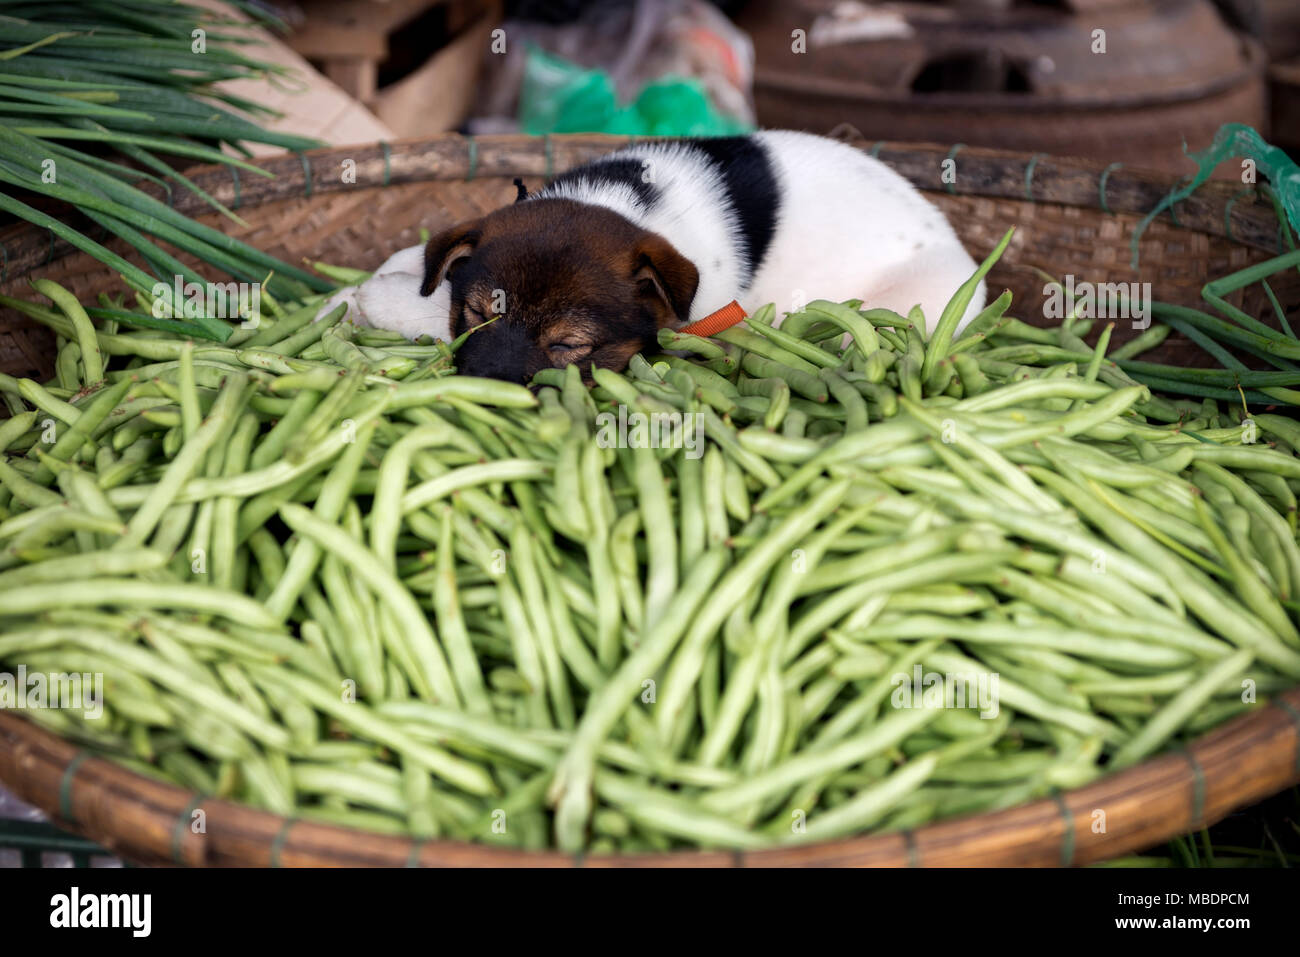 Puppy sleeping on a basket of green beans (the dog was a pet, it was not for sale) Stock Photo